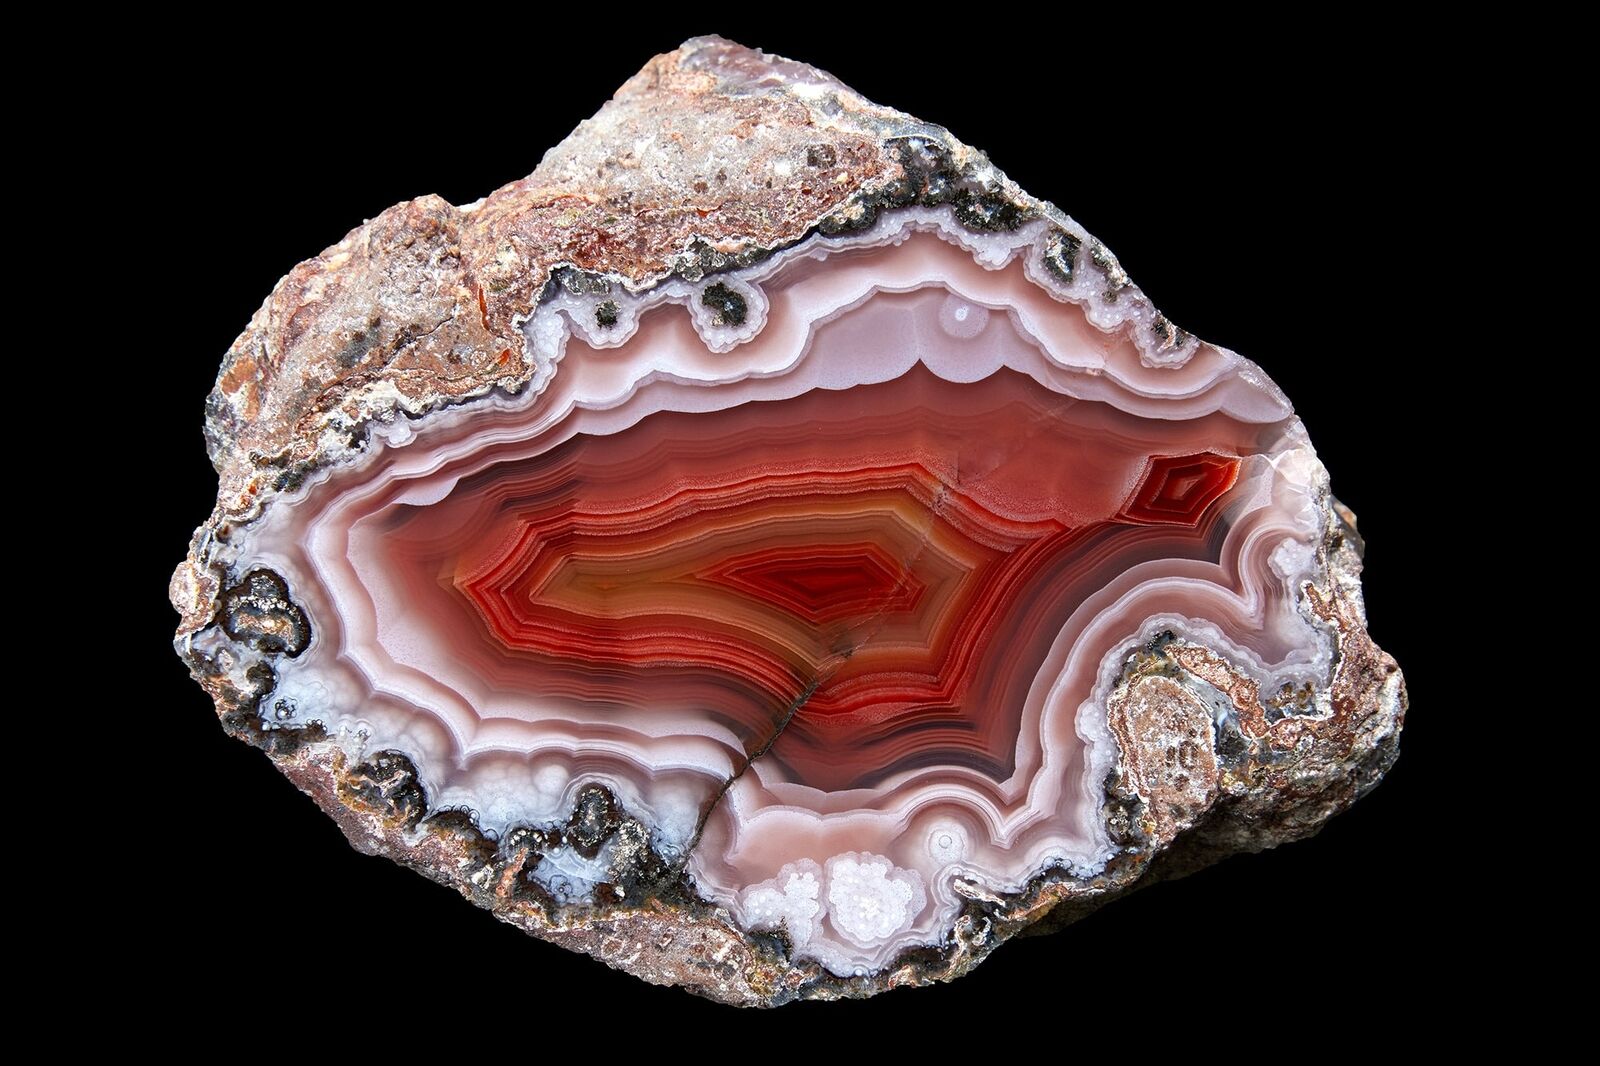 Laguna Agate From Mexico Collectors Grade Tight Banding and High Contrast